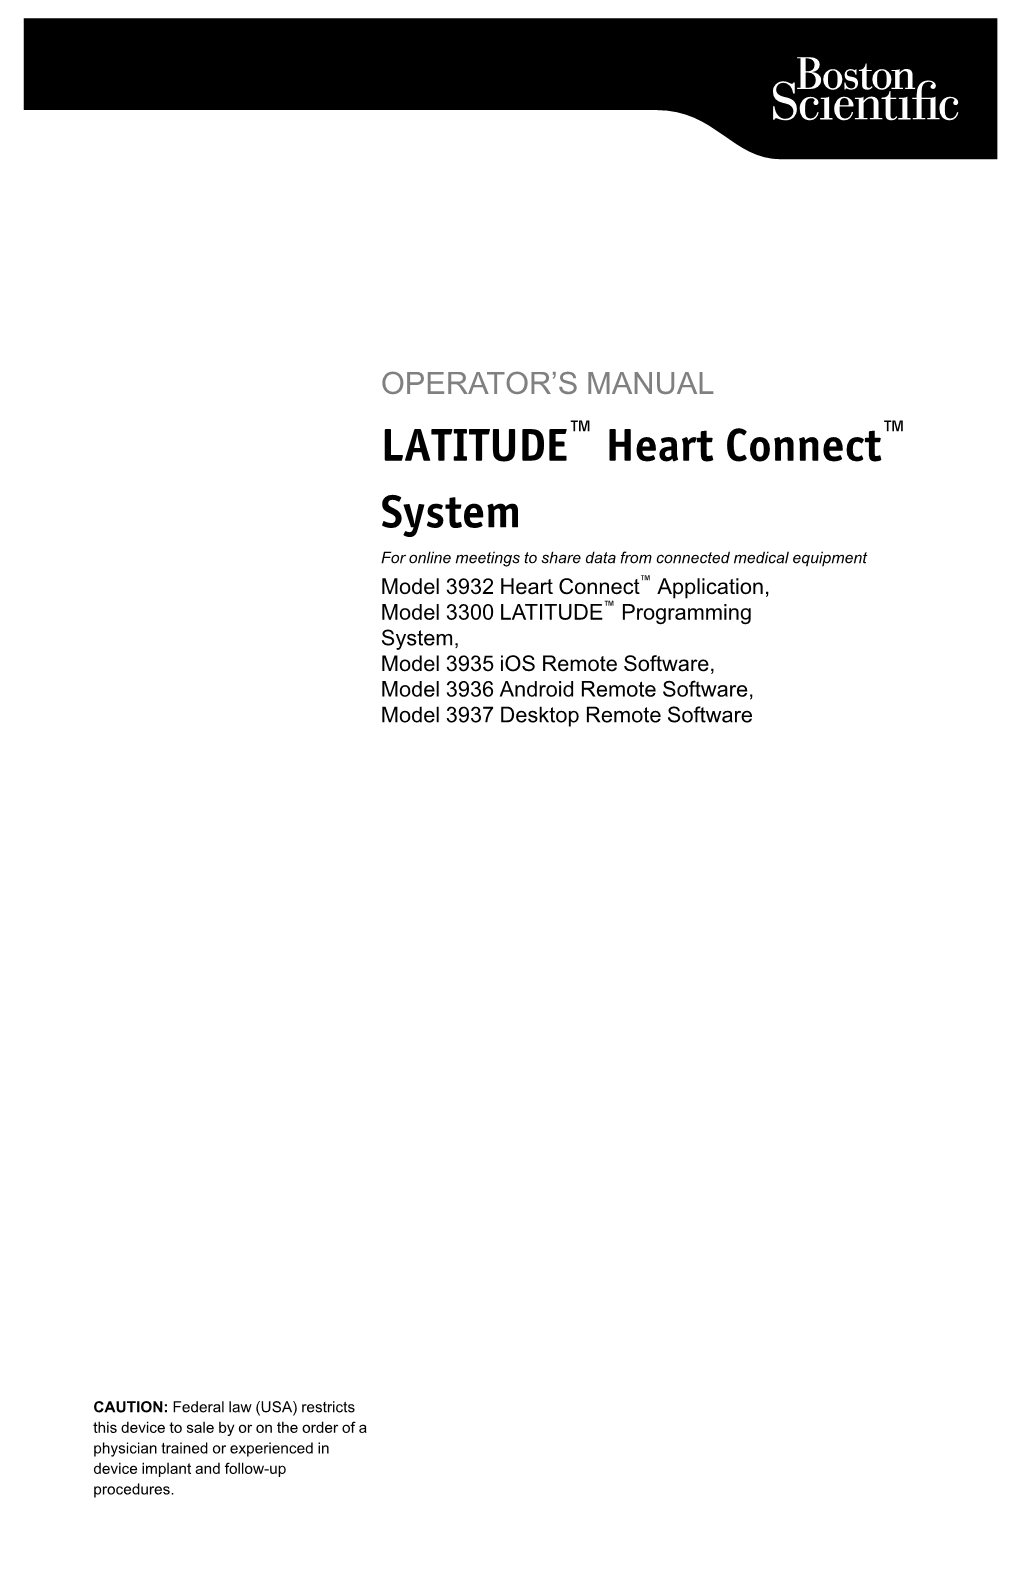 LATITUDE™ Heart Connect™ System